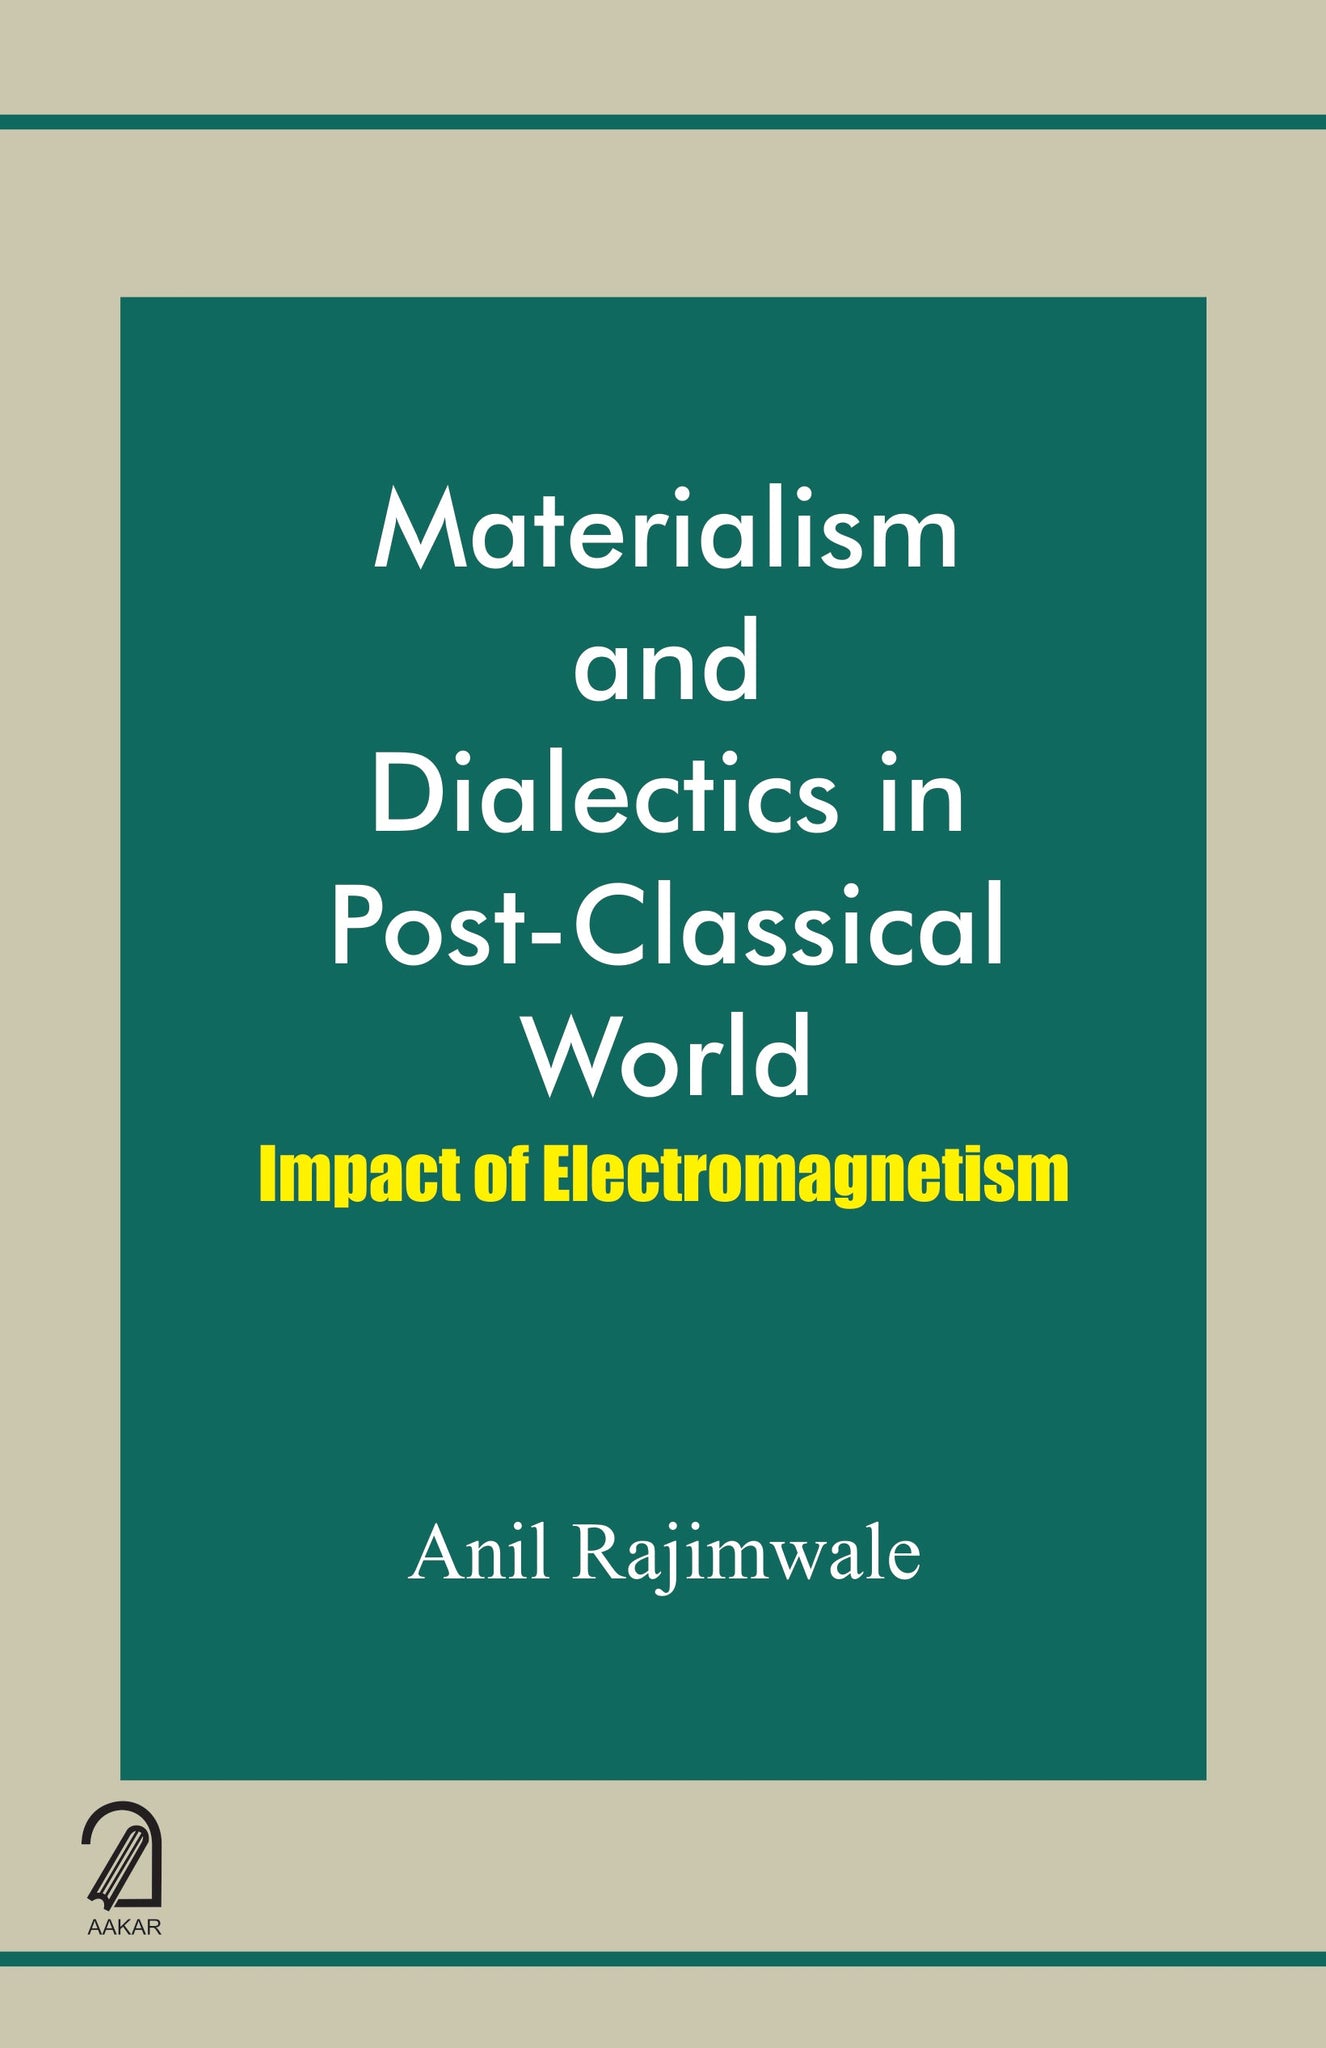 Materialism and Dialectics in Post-Classical World: Impact of Electromagnetism